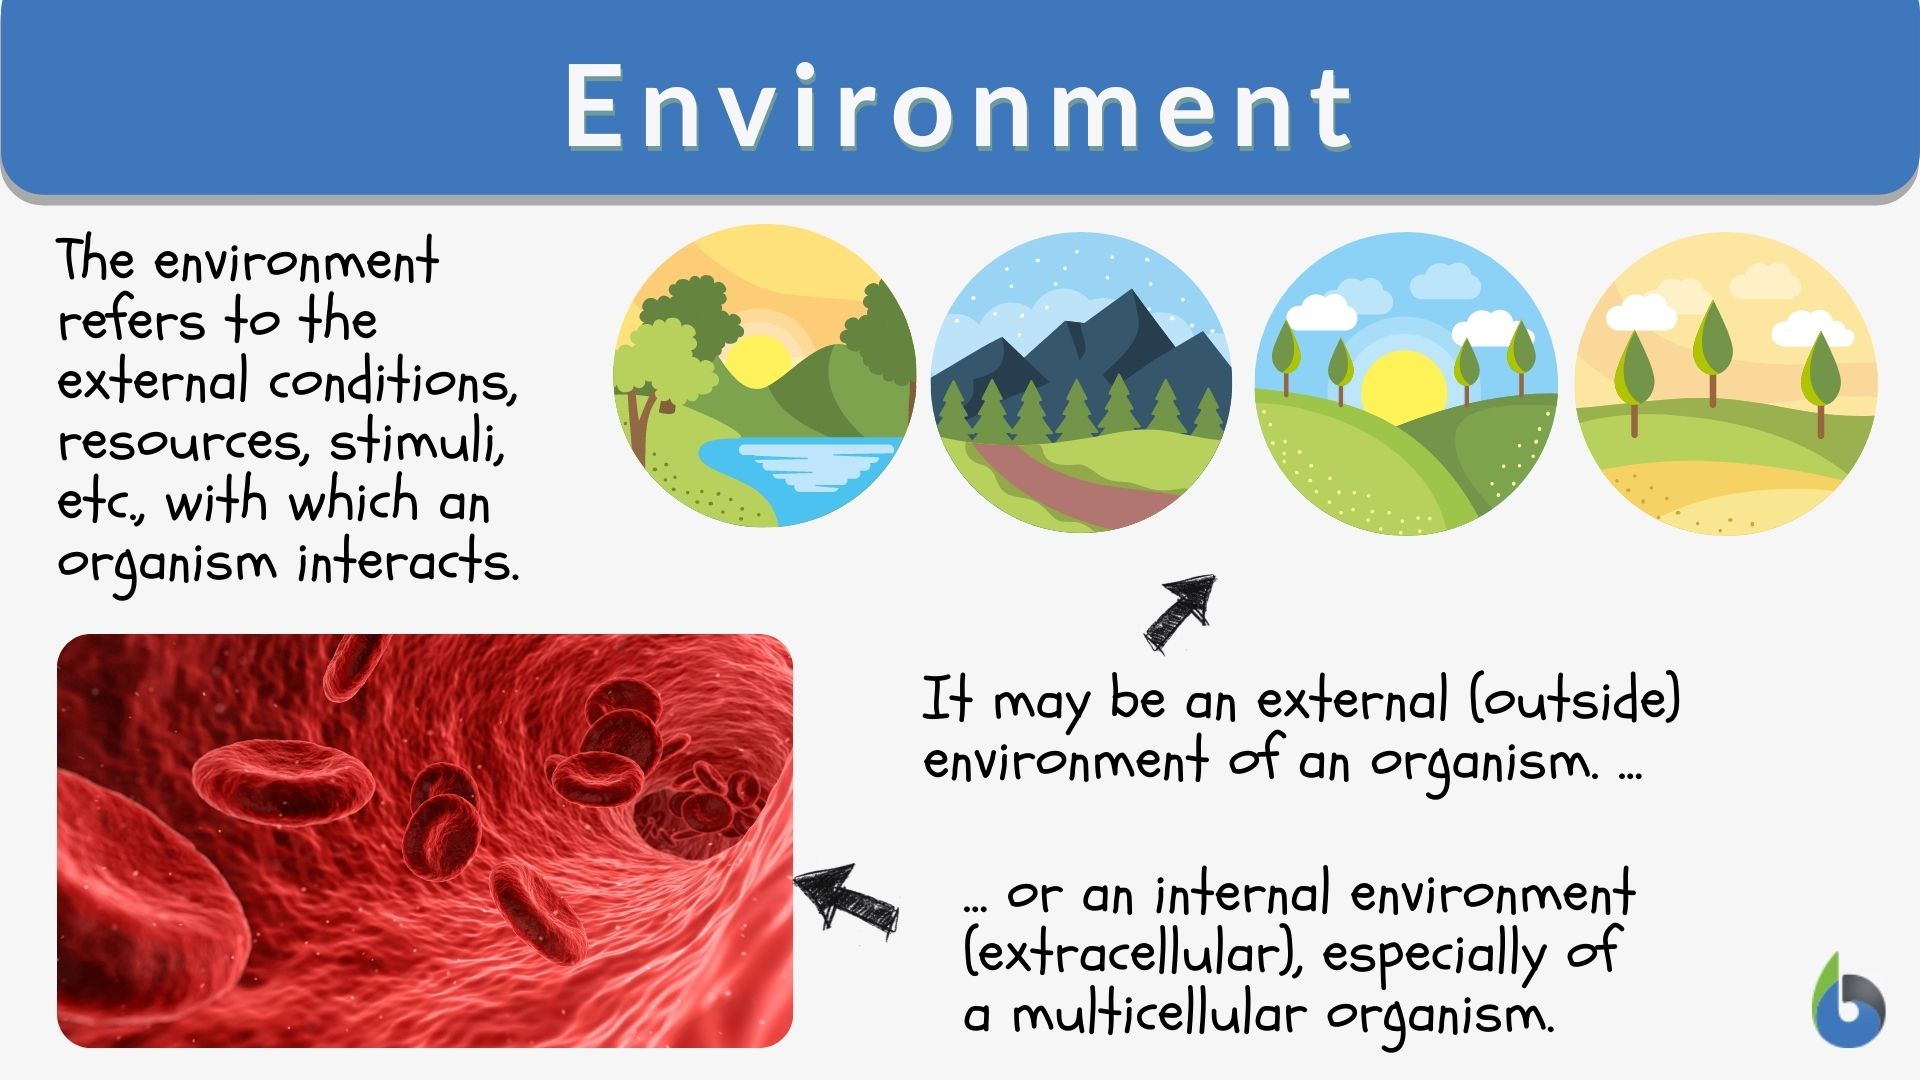 What is the meaning of environment Basic 5?